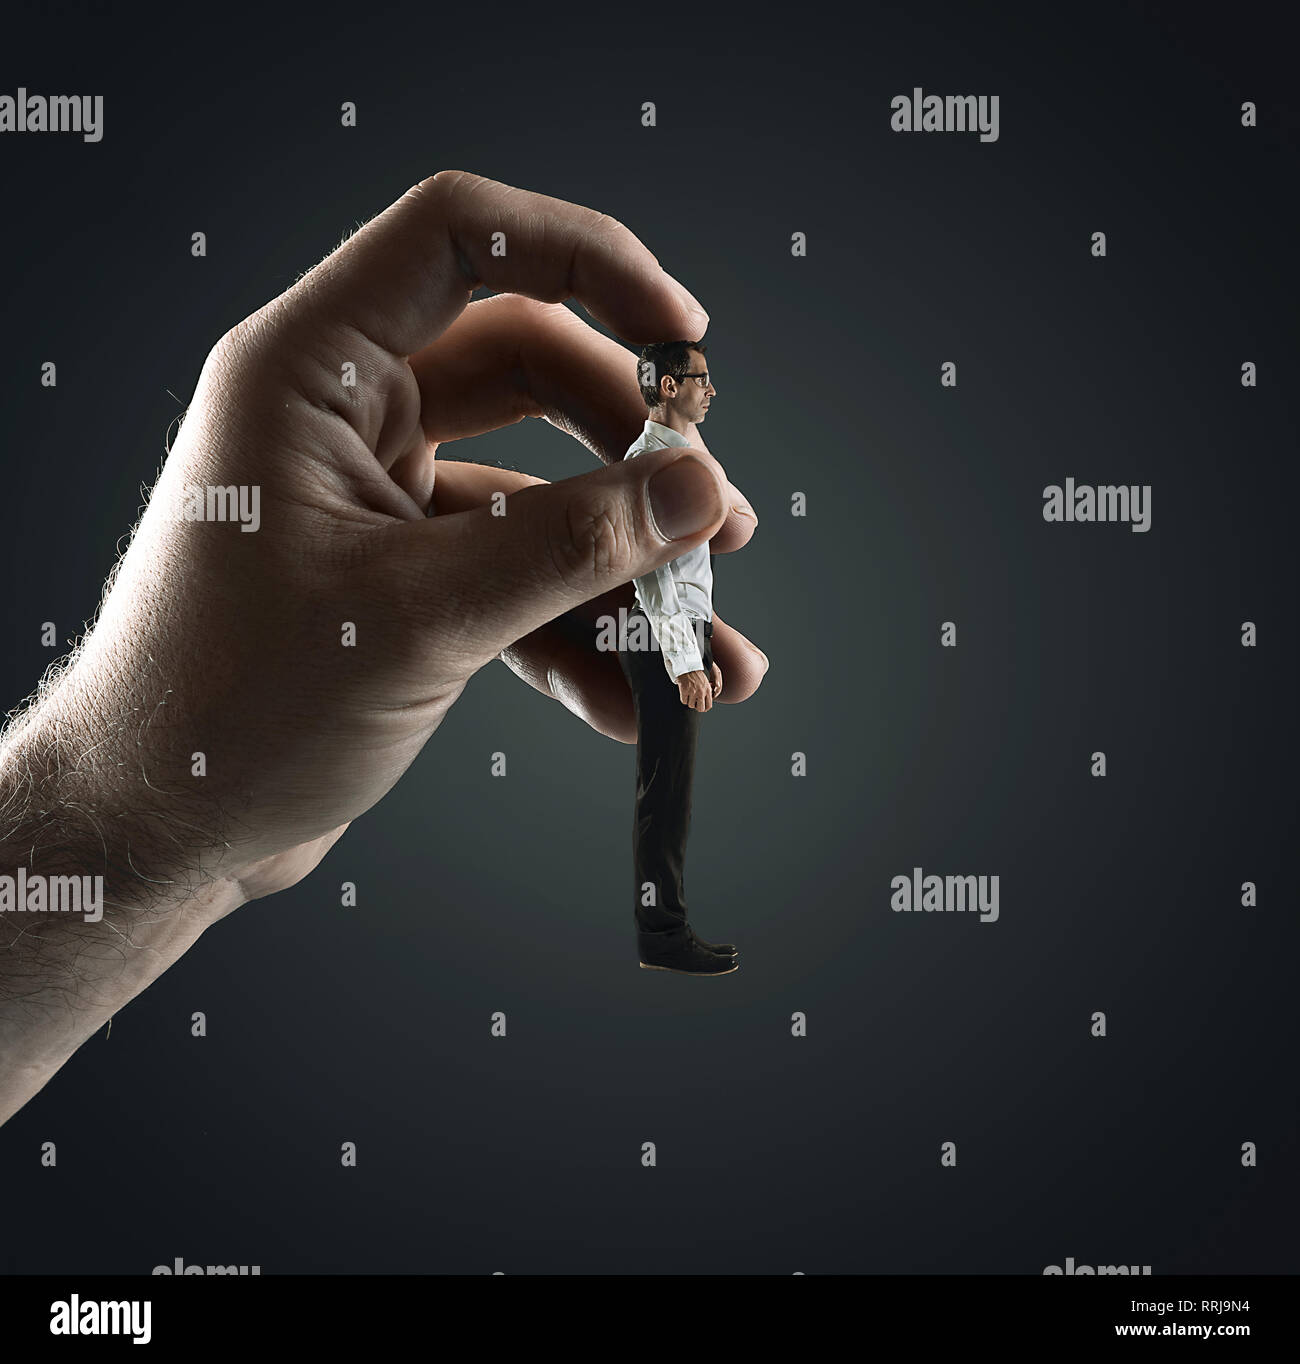 Coneptual portrait of a emplyee marionette - work symbol Stock Photo